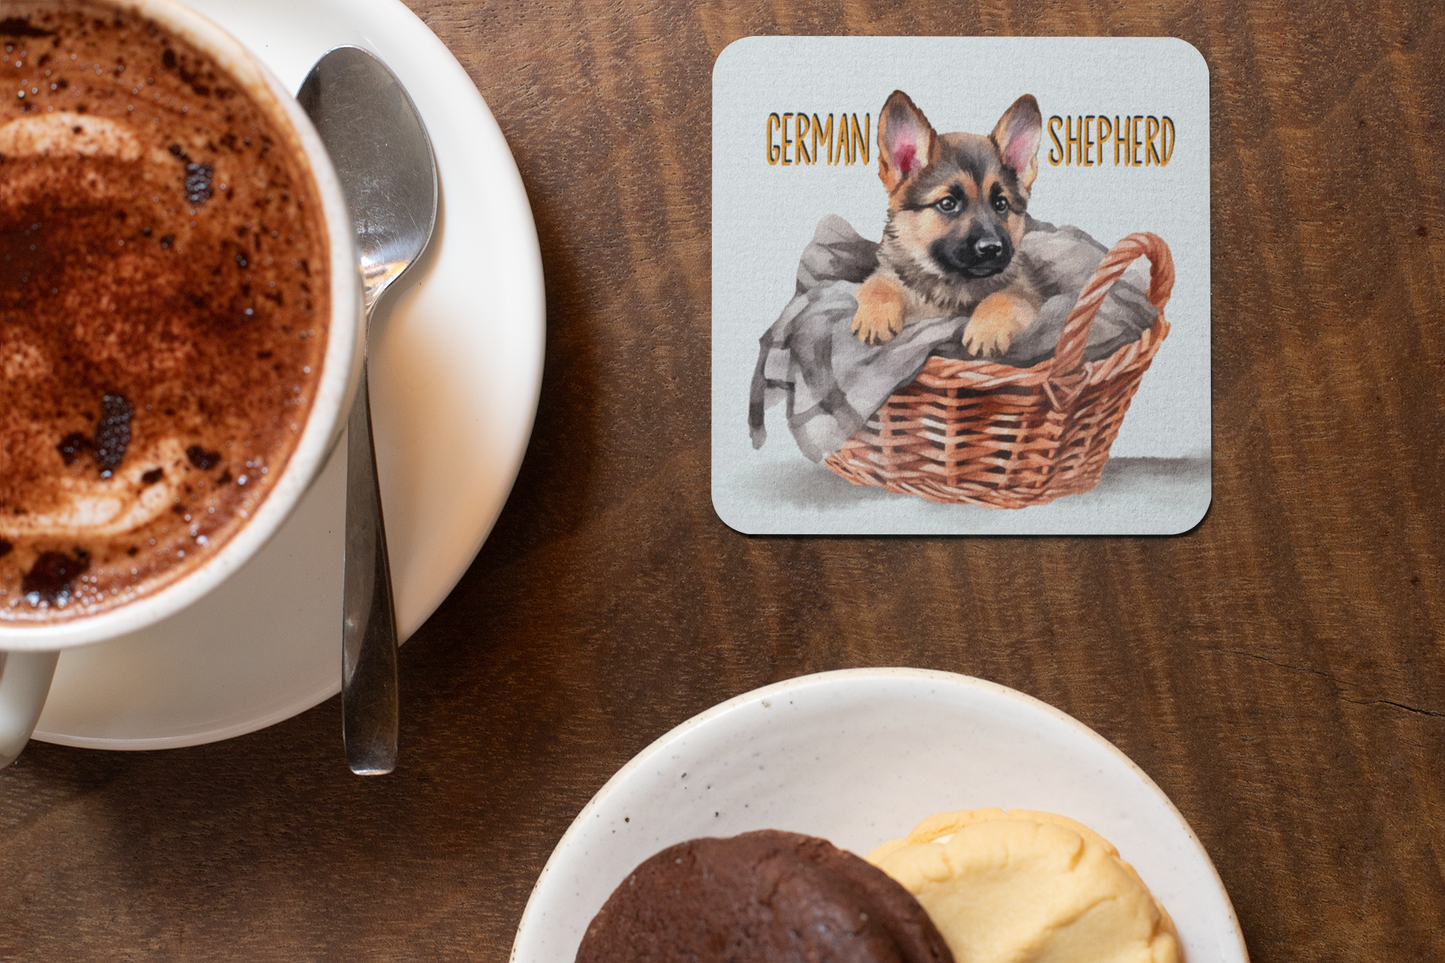 German Shepherd Puppy Dogs Collection Art Square Personalised Coaster Gift Idea